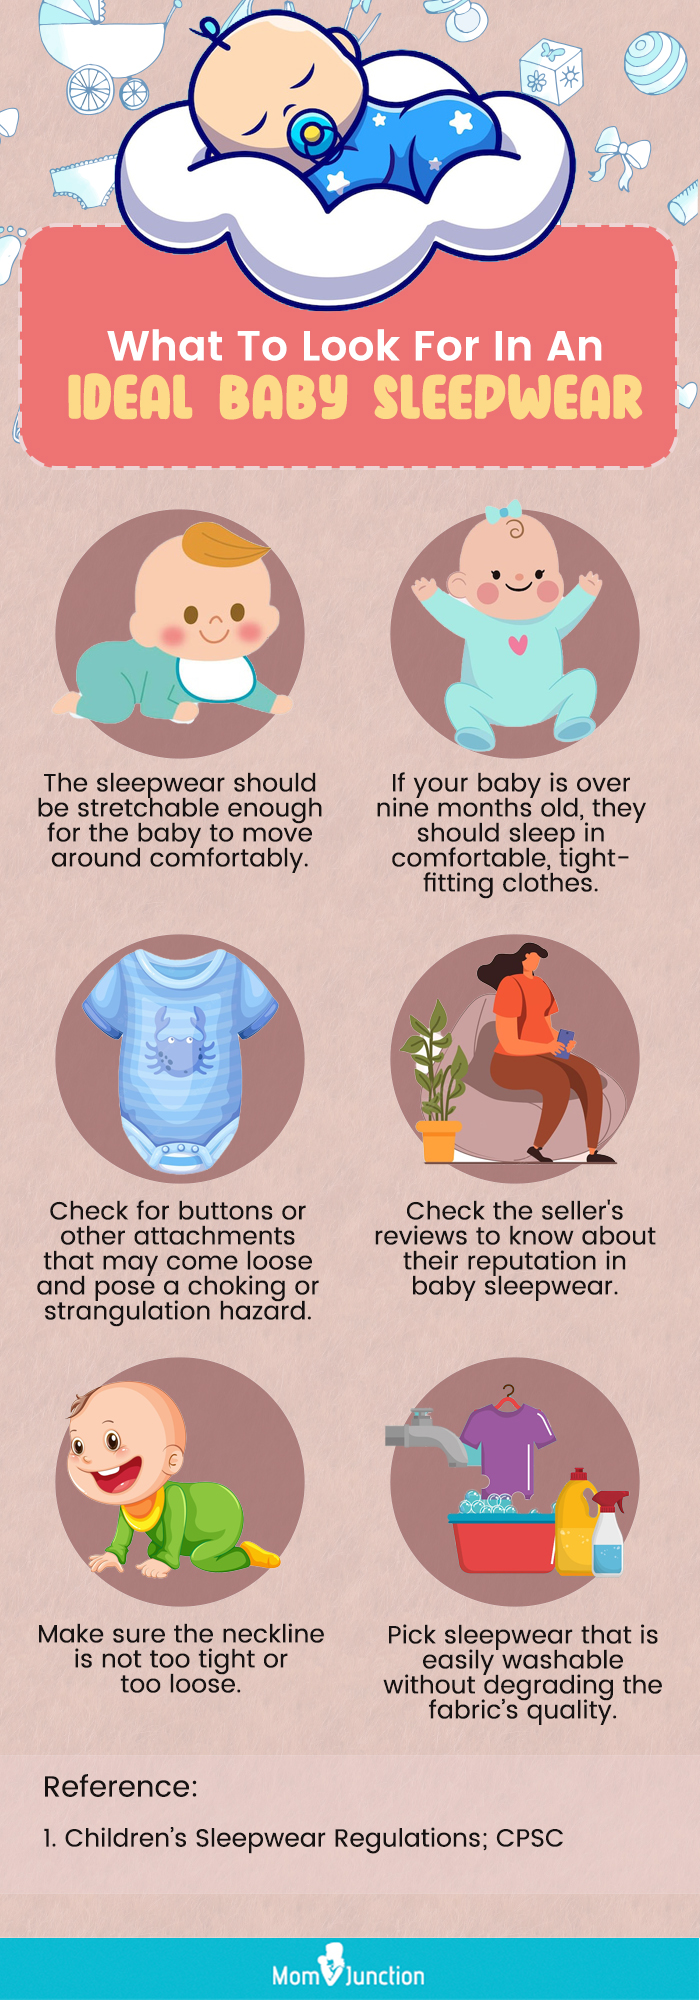 what to look for in an ideal baby sleepwear (infographic)